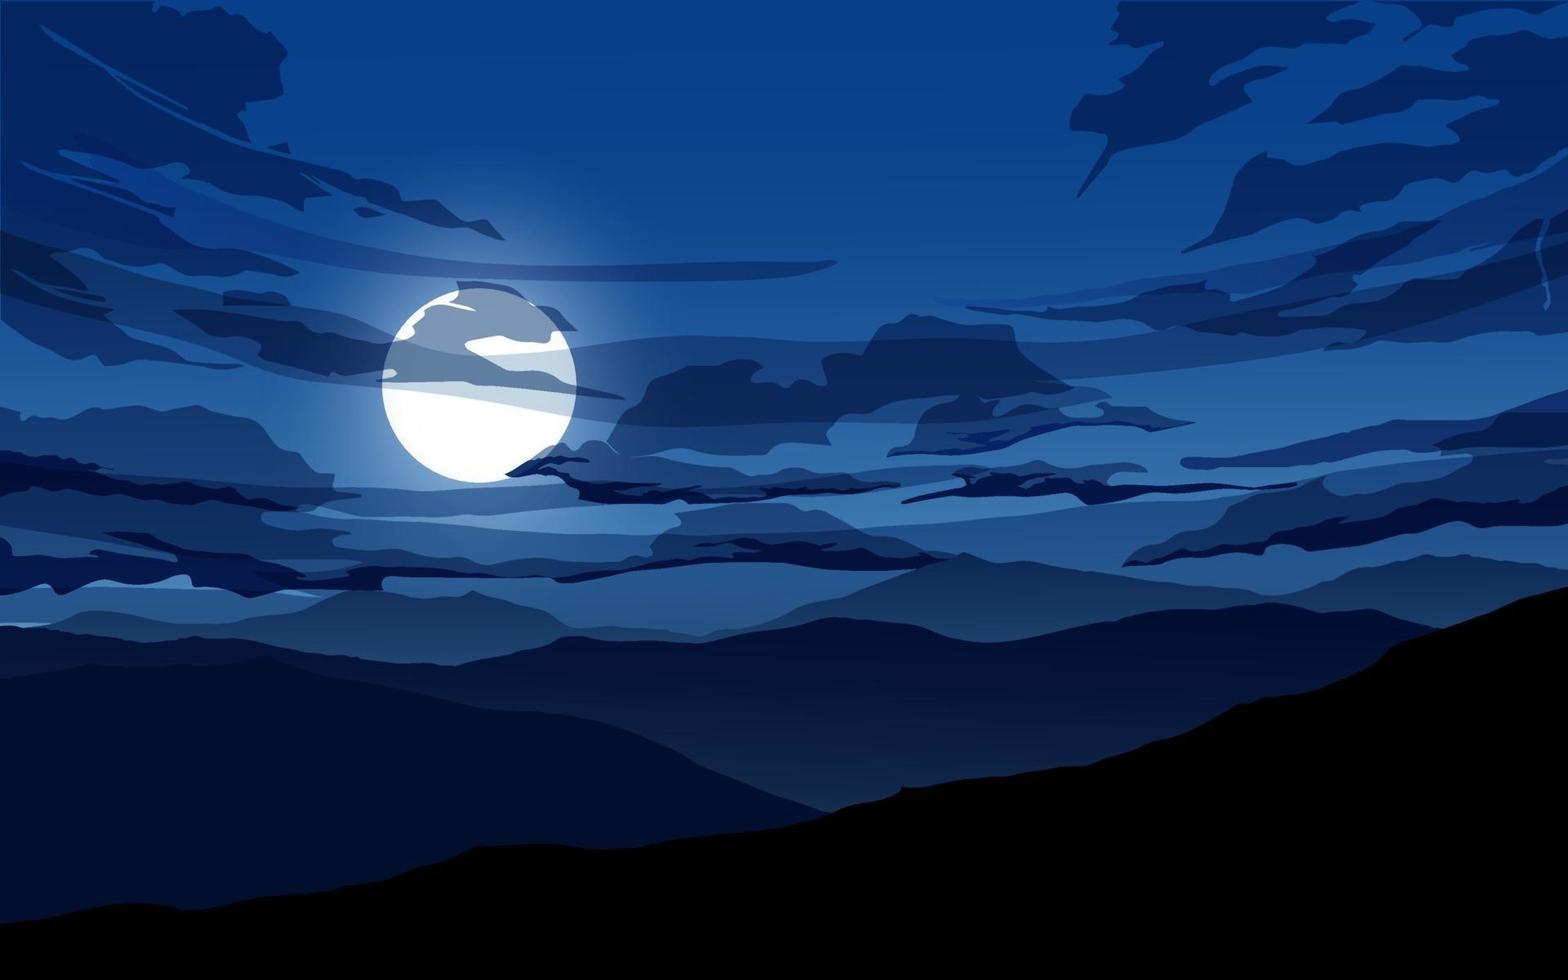 Moon and Clouds at Night vector